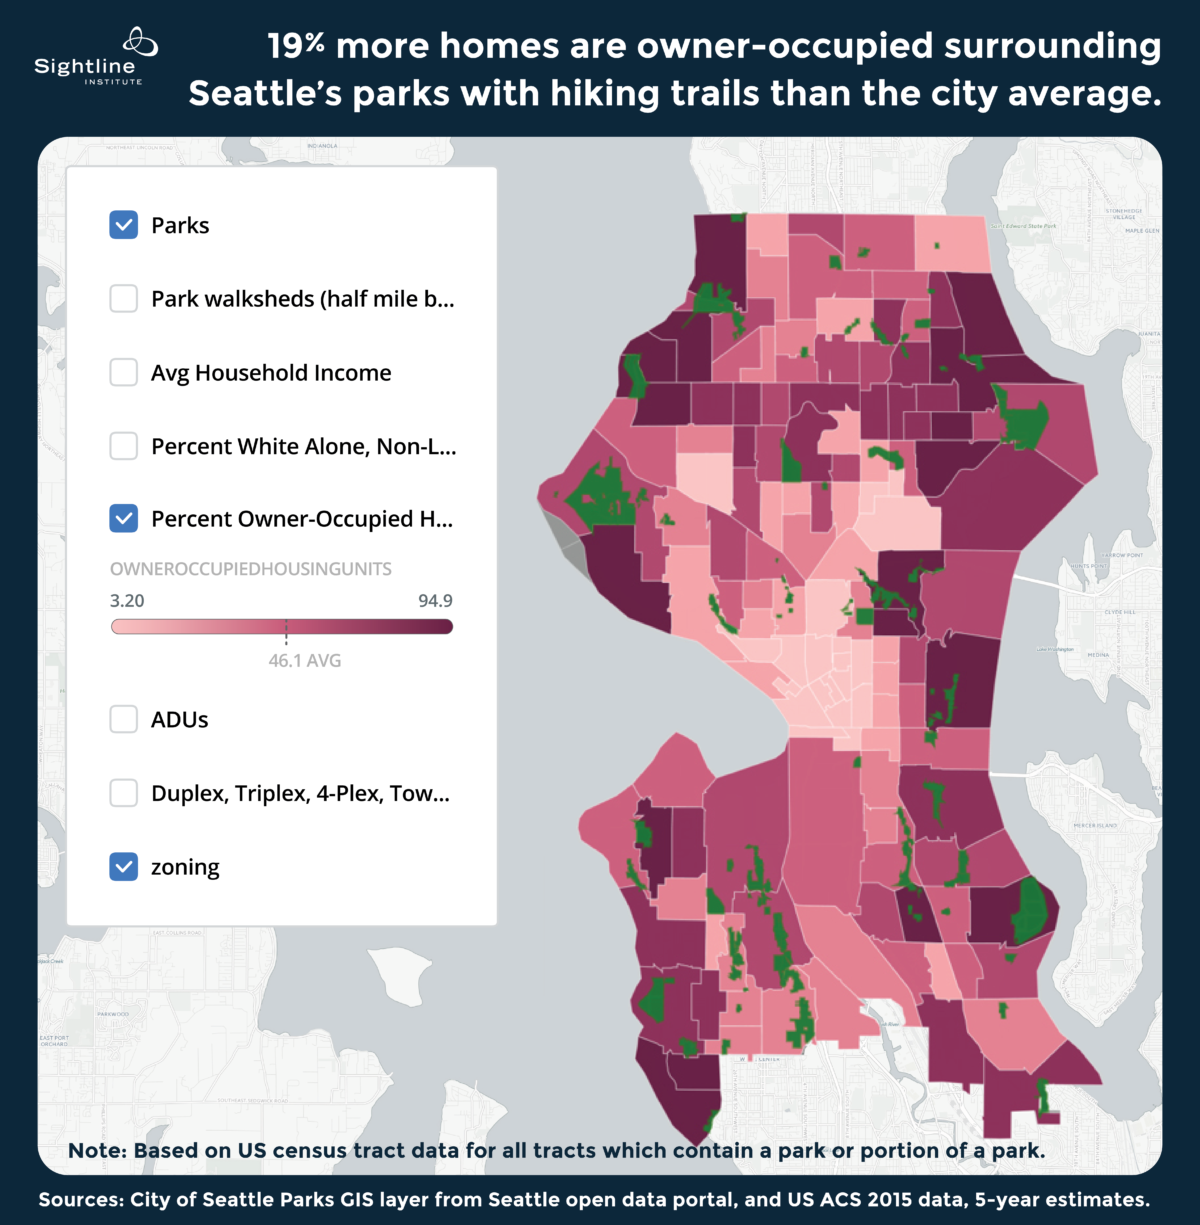 The map shows all of Seattle’s parks with hiking trails in green. The city’s census tracts are color-coded based on the percentage of housing units that are owner-occupied, with darkest pink tracts having 85 percent or more owner-occupied units and lightest pink tracts having 15 percent or fewer owner-occupied units. Sixty percent of households in census tracts surrounding parks with hiking trails are owner-occupied. Original Sightline Institute graphic, available under our free use policy.